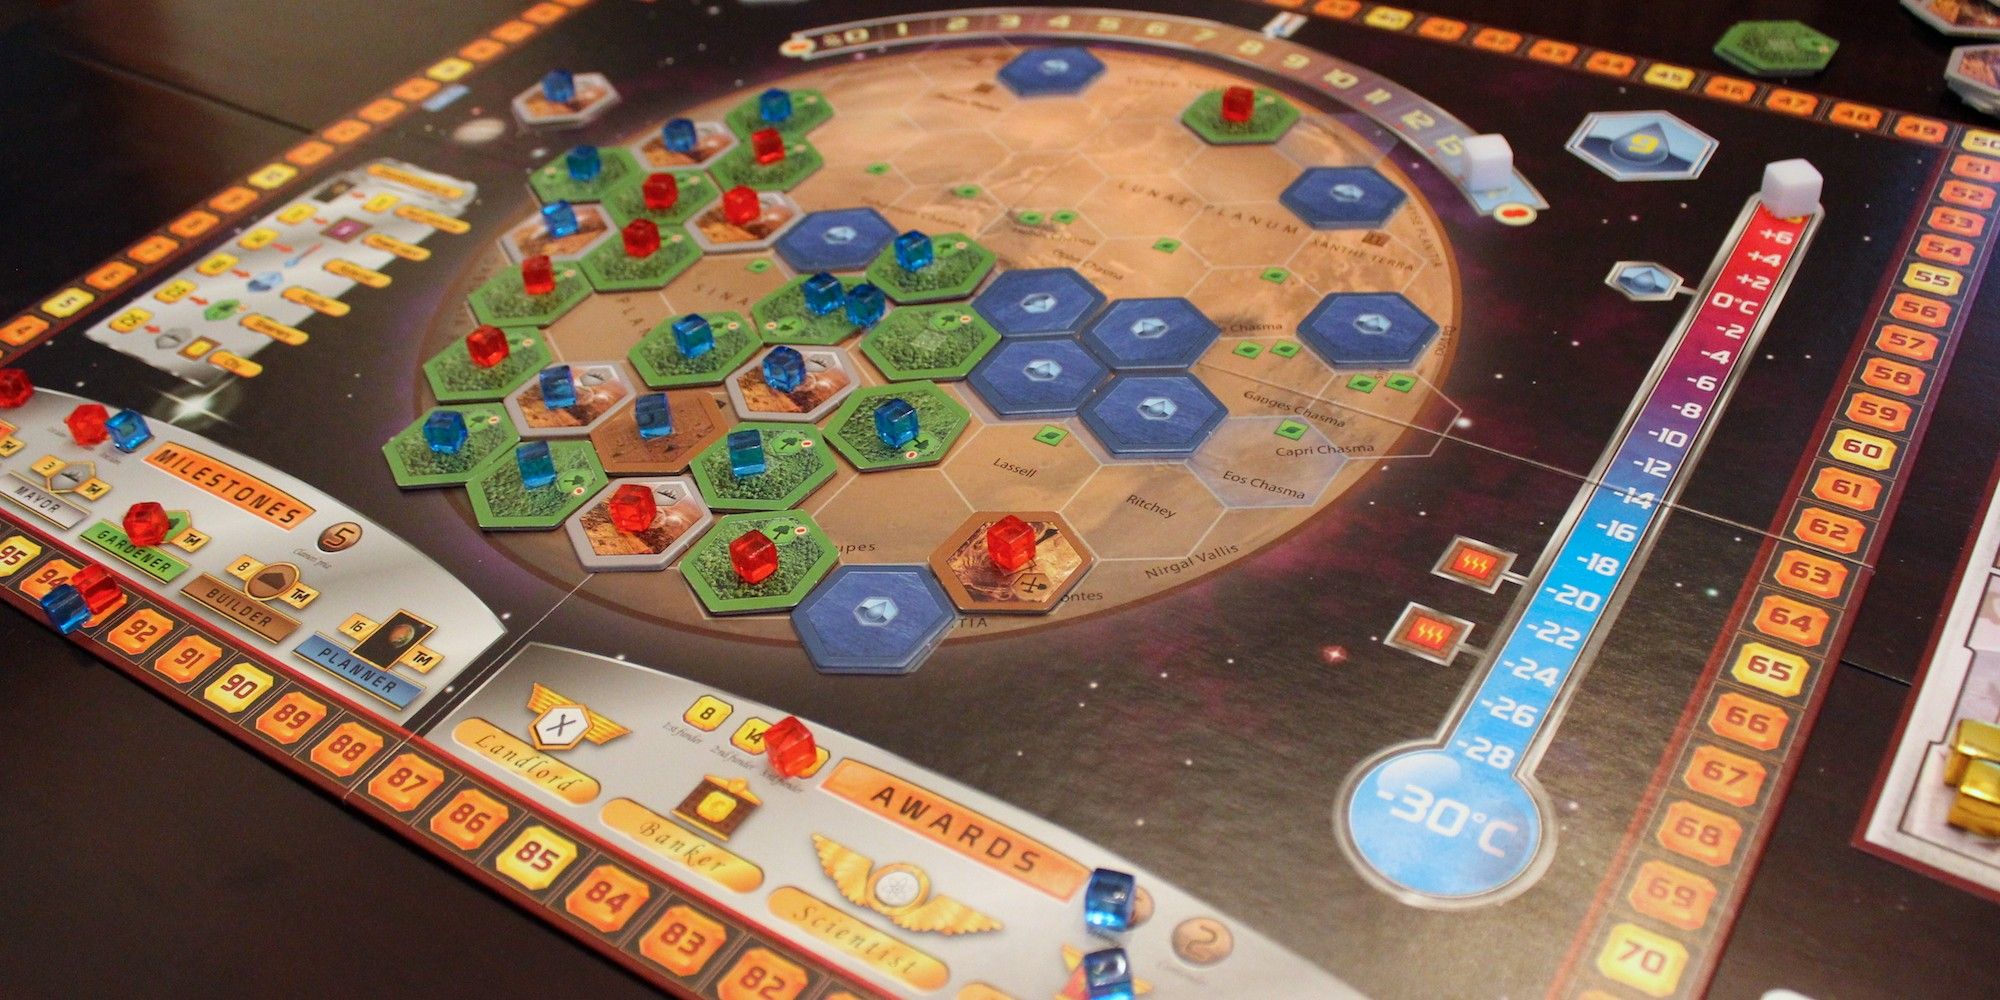 A board setup for the board game Terraforming Mars.